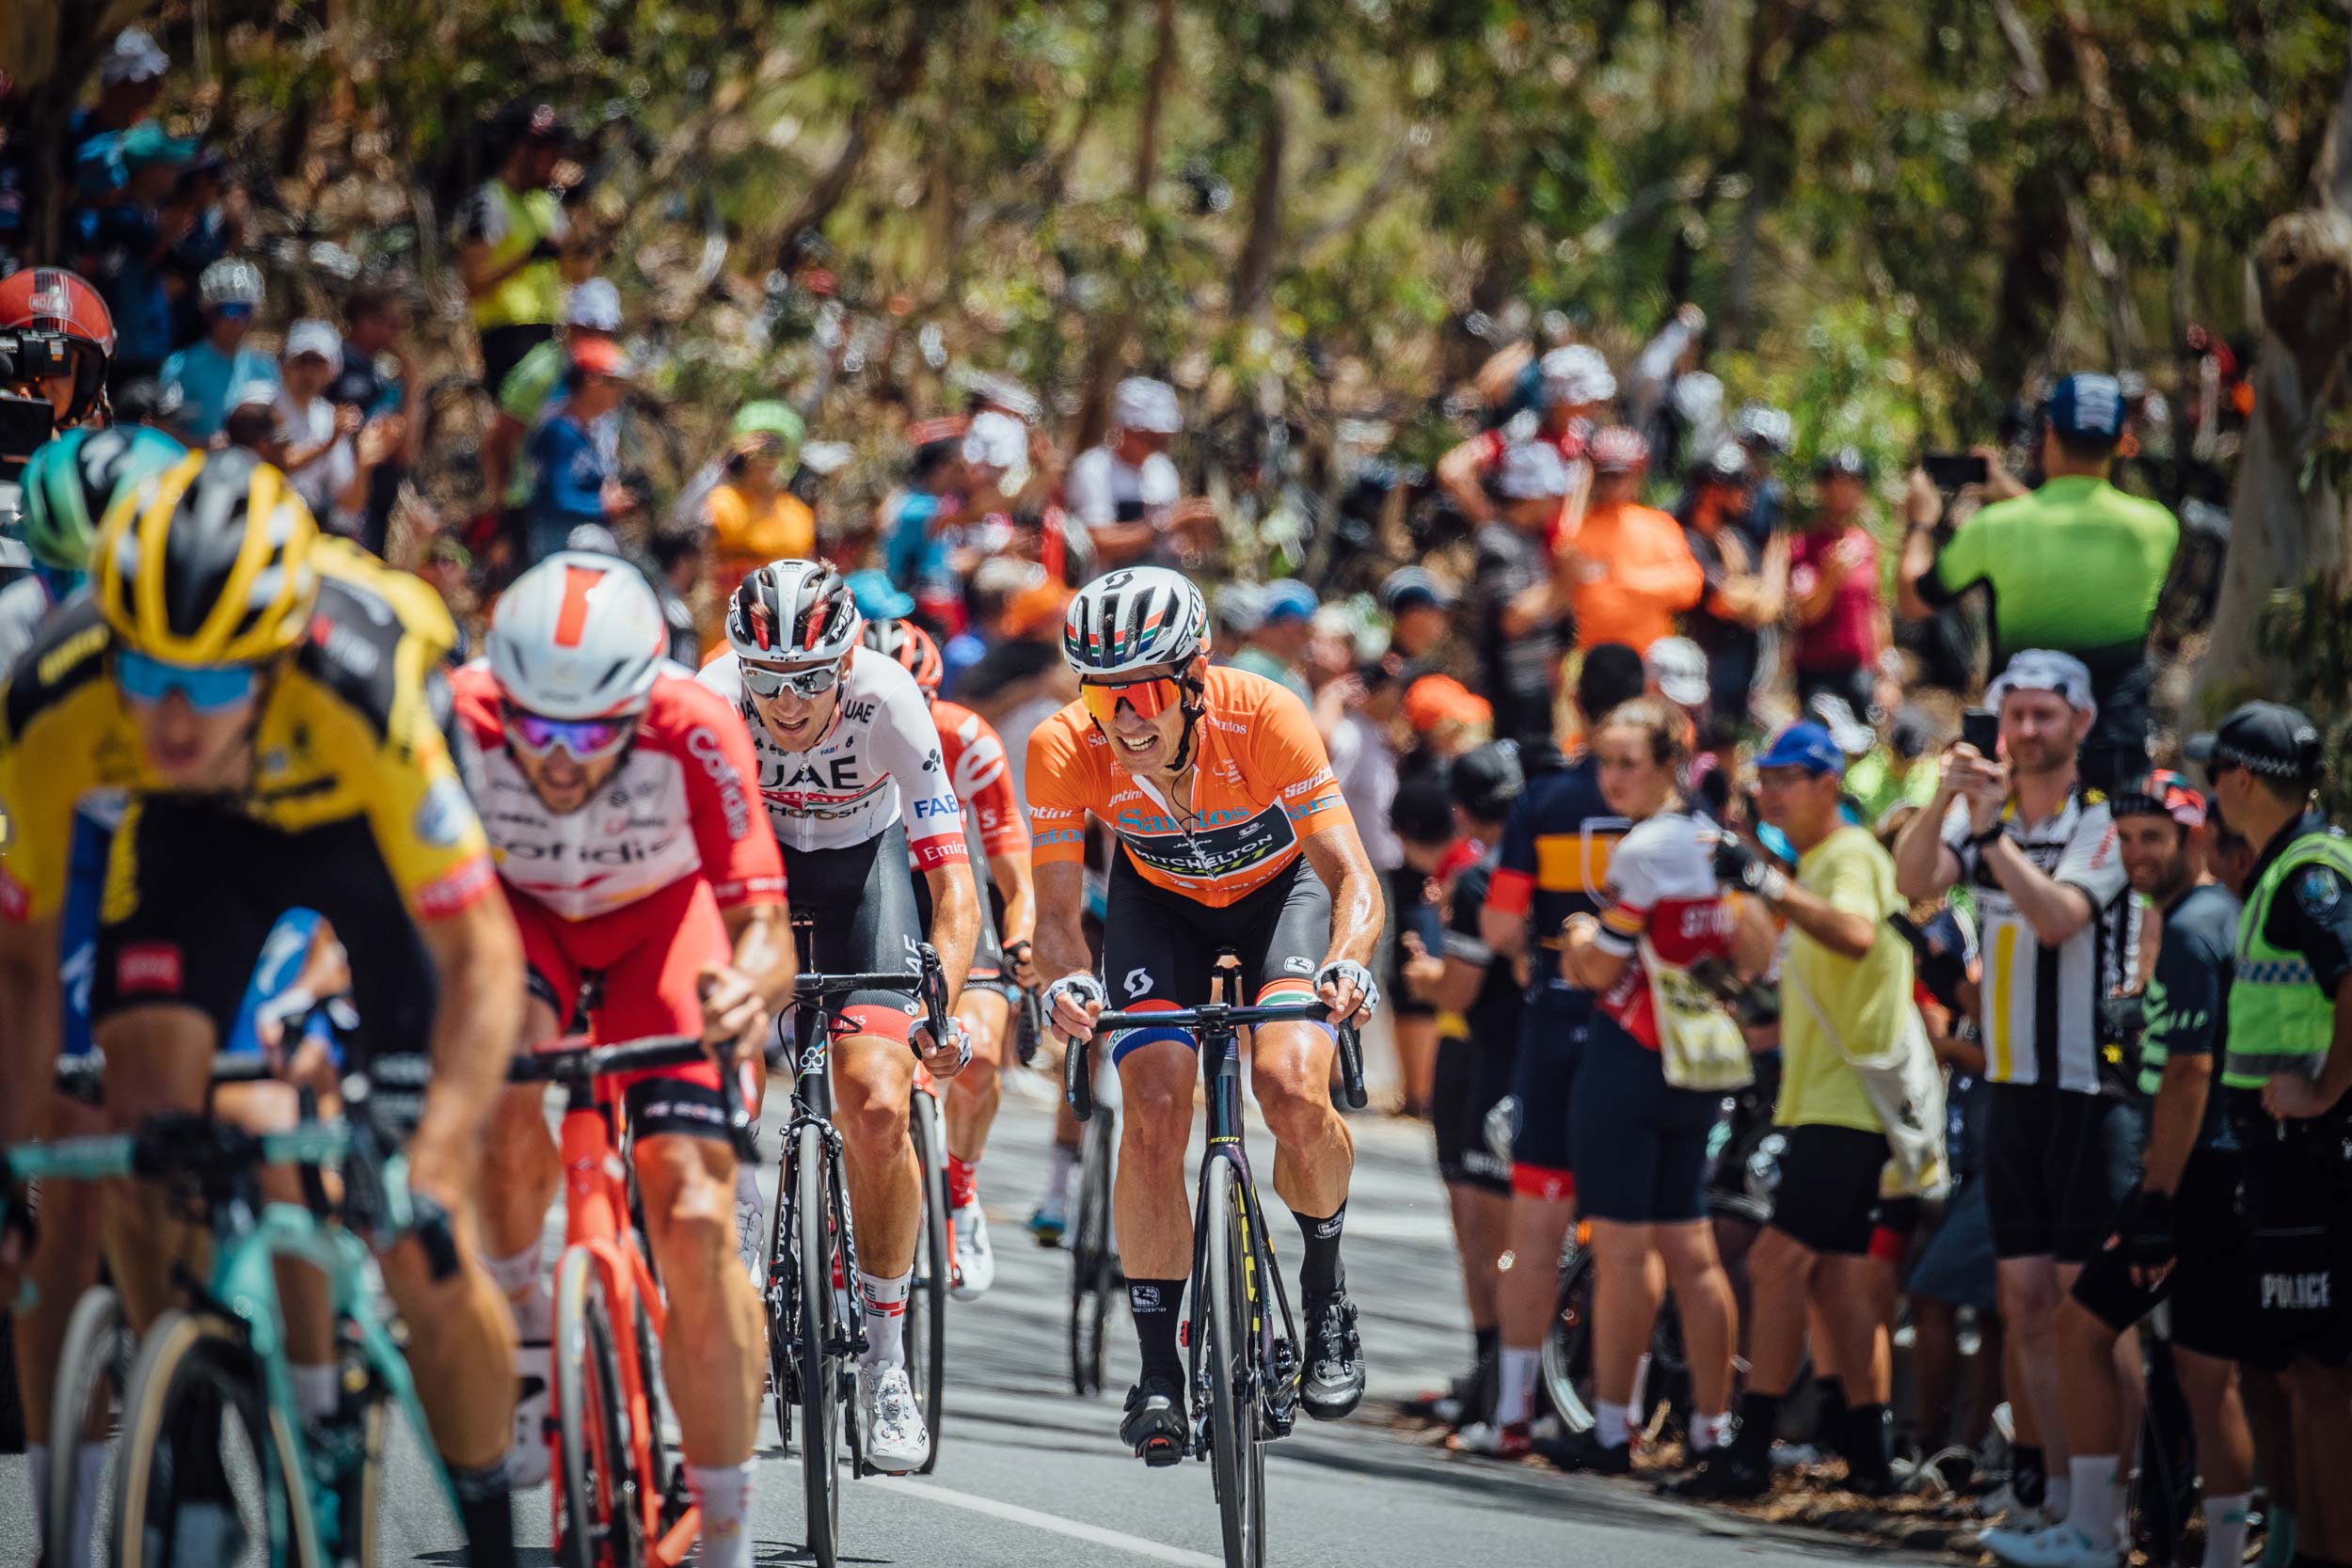 Prime opportunity for Cycling in Australia no WorldTour here in 2021 but huge scope exists